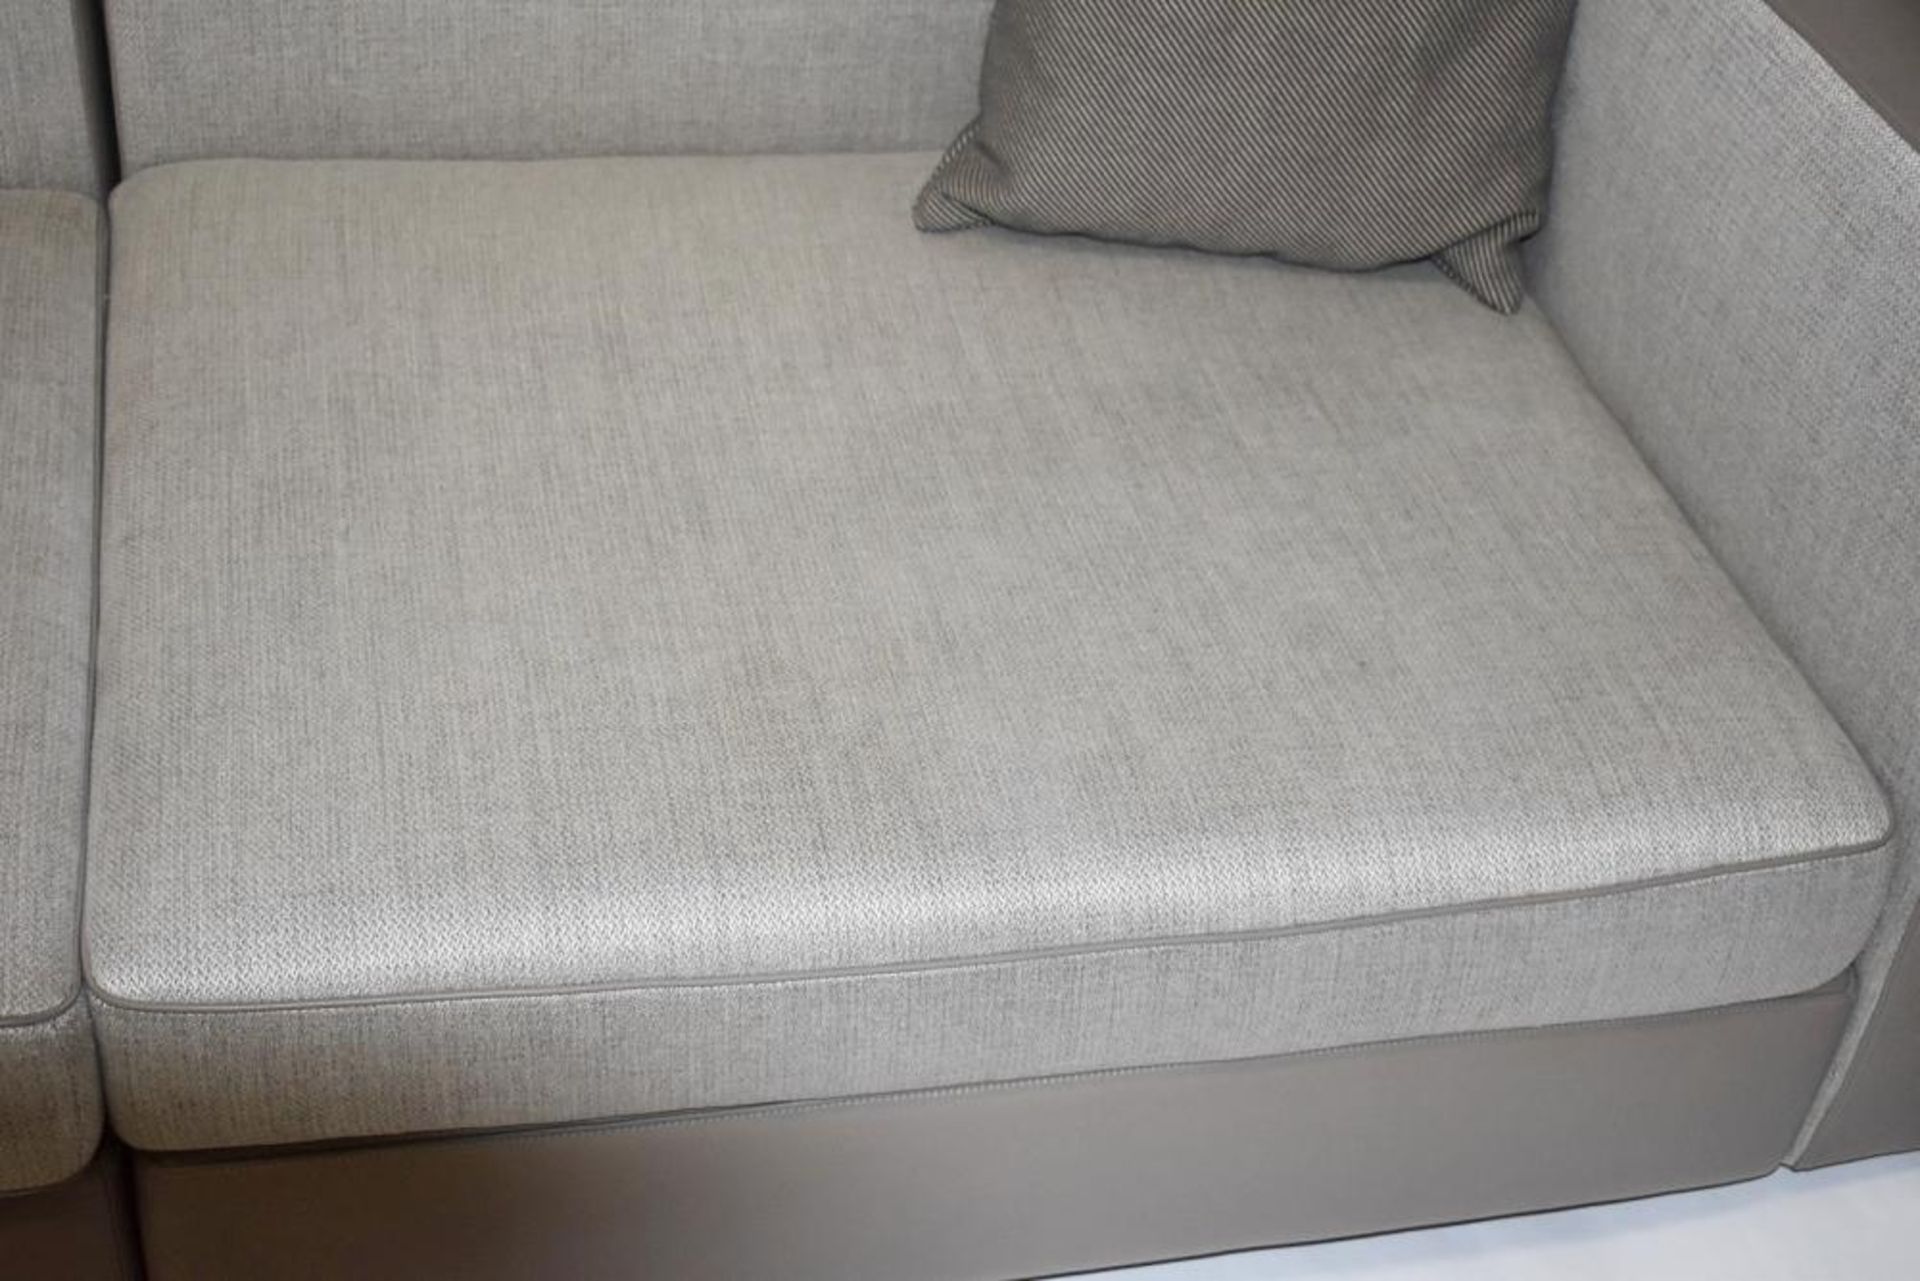 1 x POLTRONA FRAU 2-Section Modular Sofa - In Grey Fabric And Leather - Original RRP £5,639 - Image 5 of 9